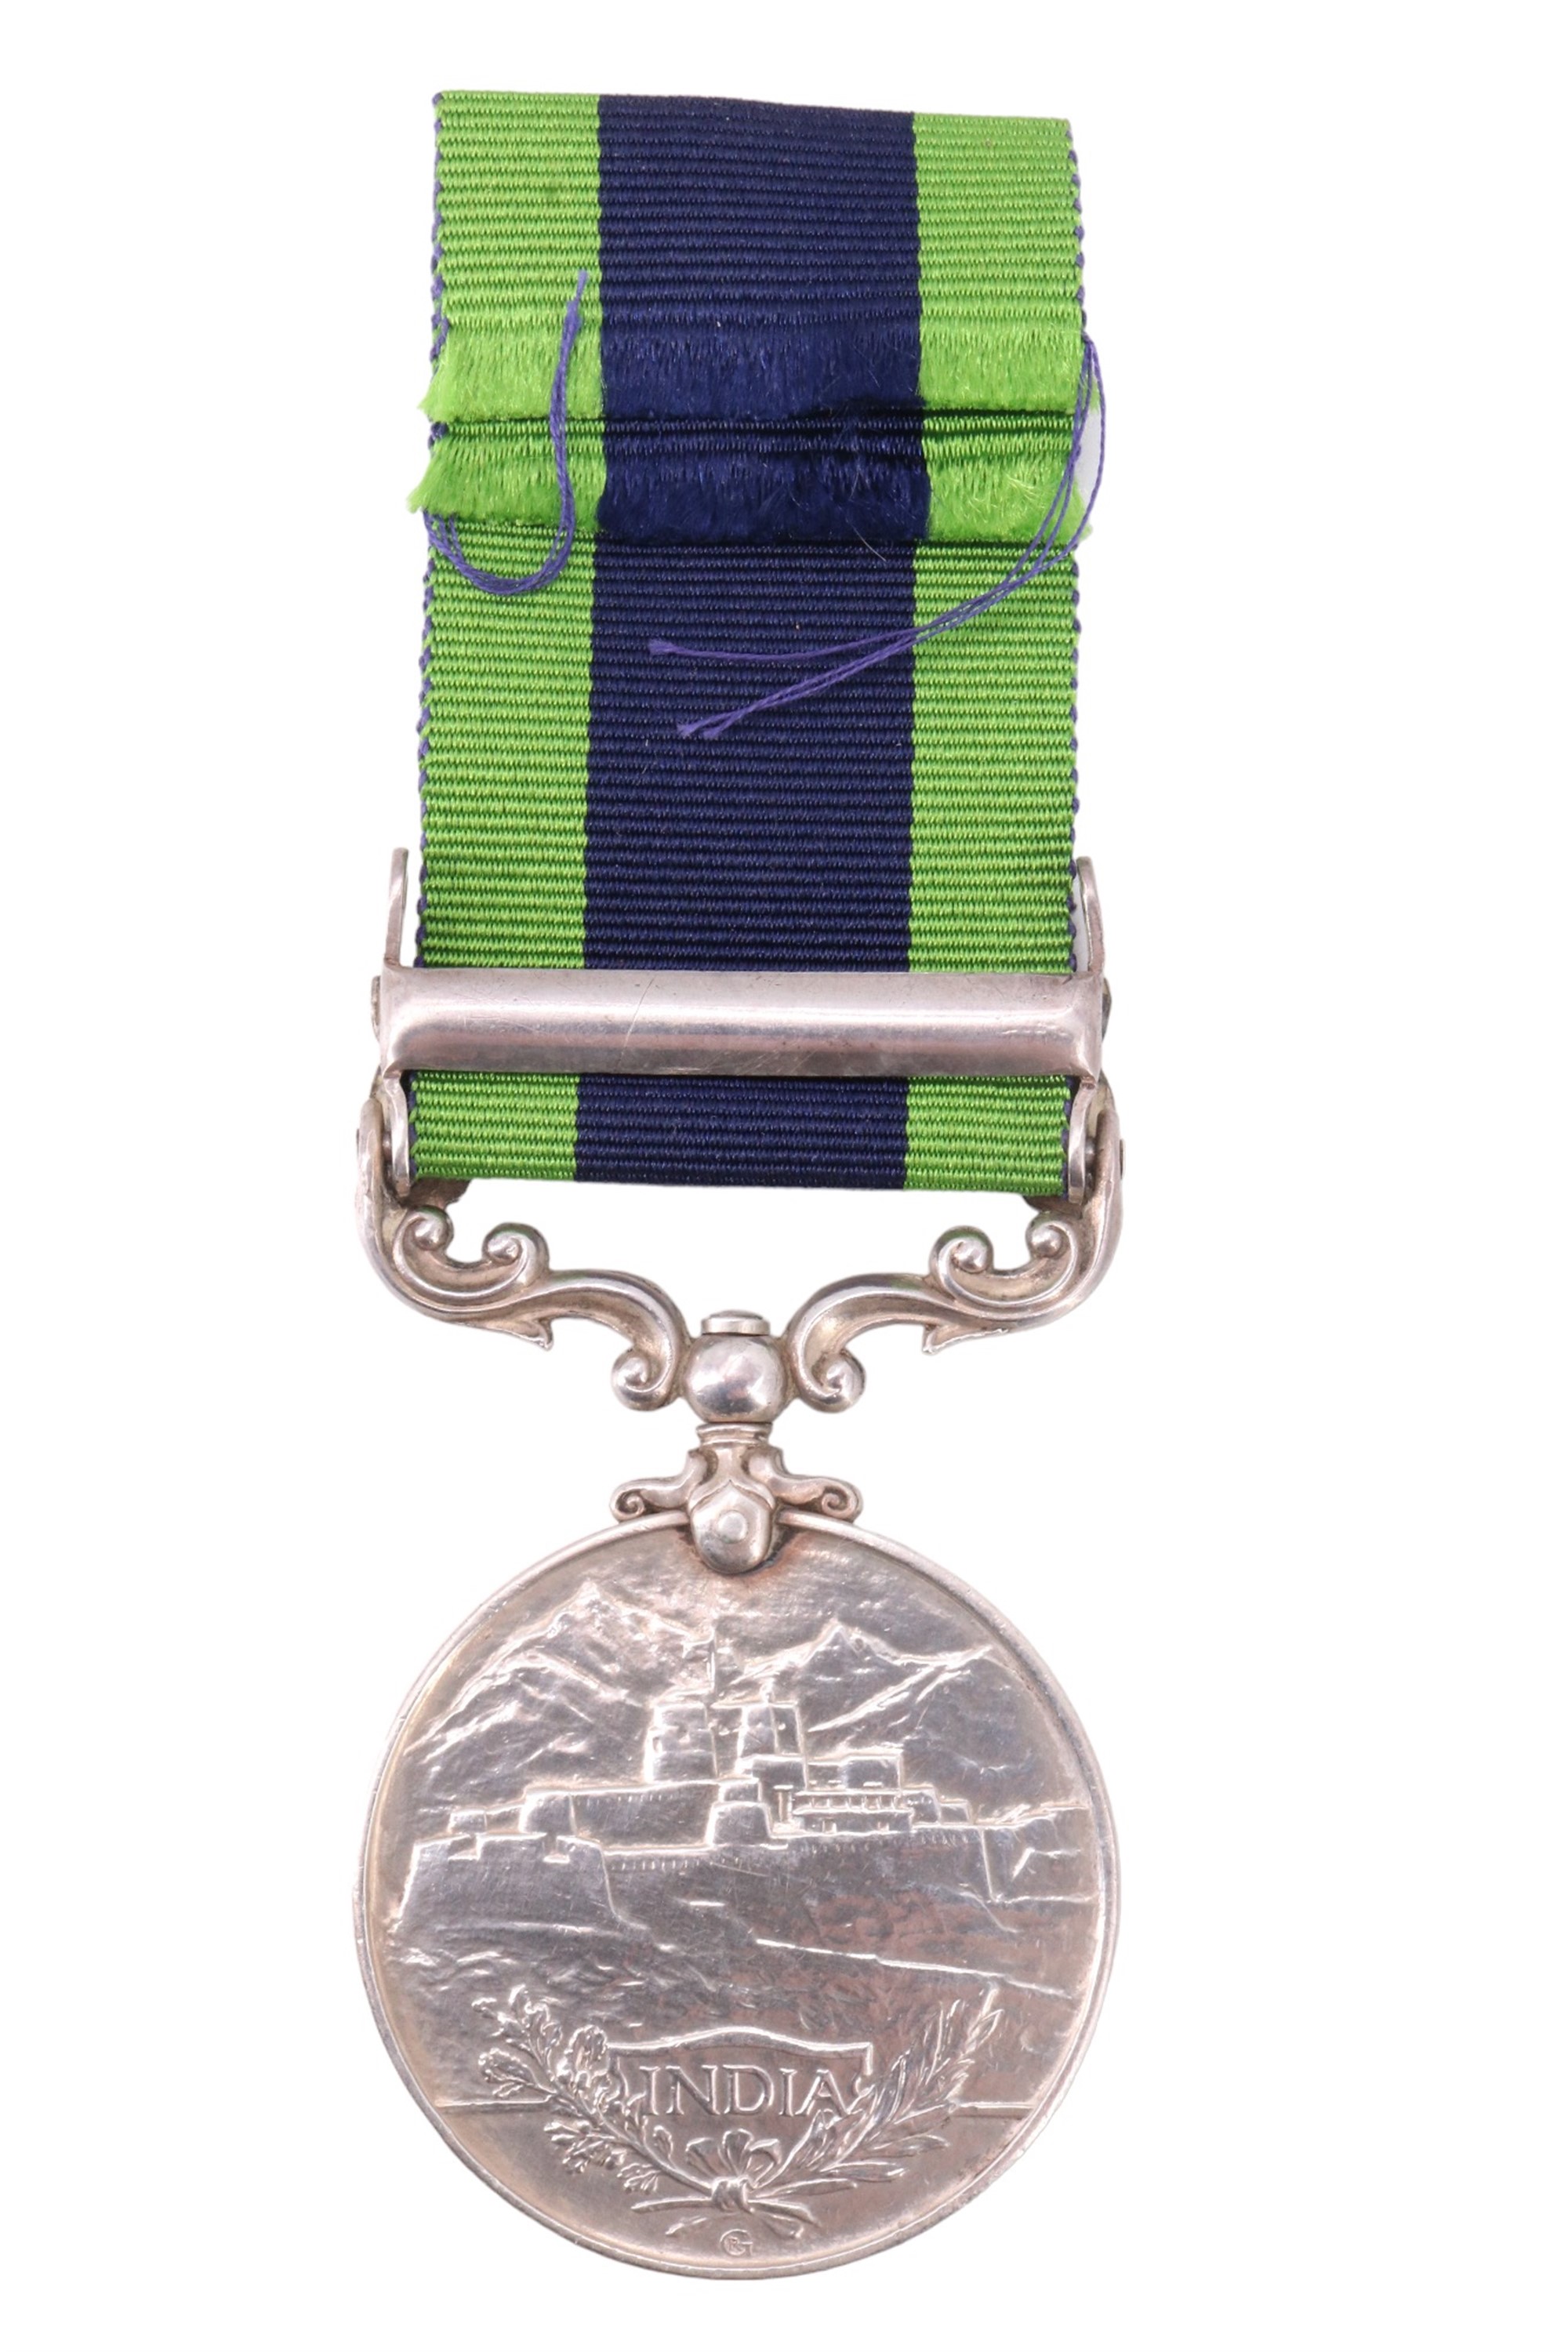 An India General Service Medal with Waziristan 1921-24 clasp to 3590549 Pte G Satterthwaite, - Image 2 of 4